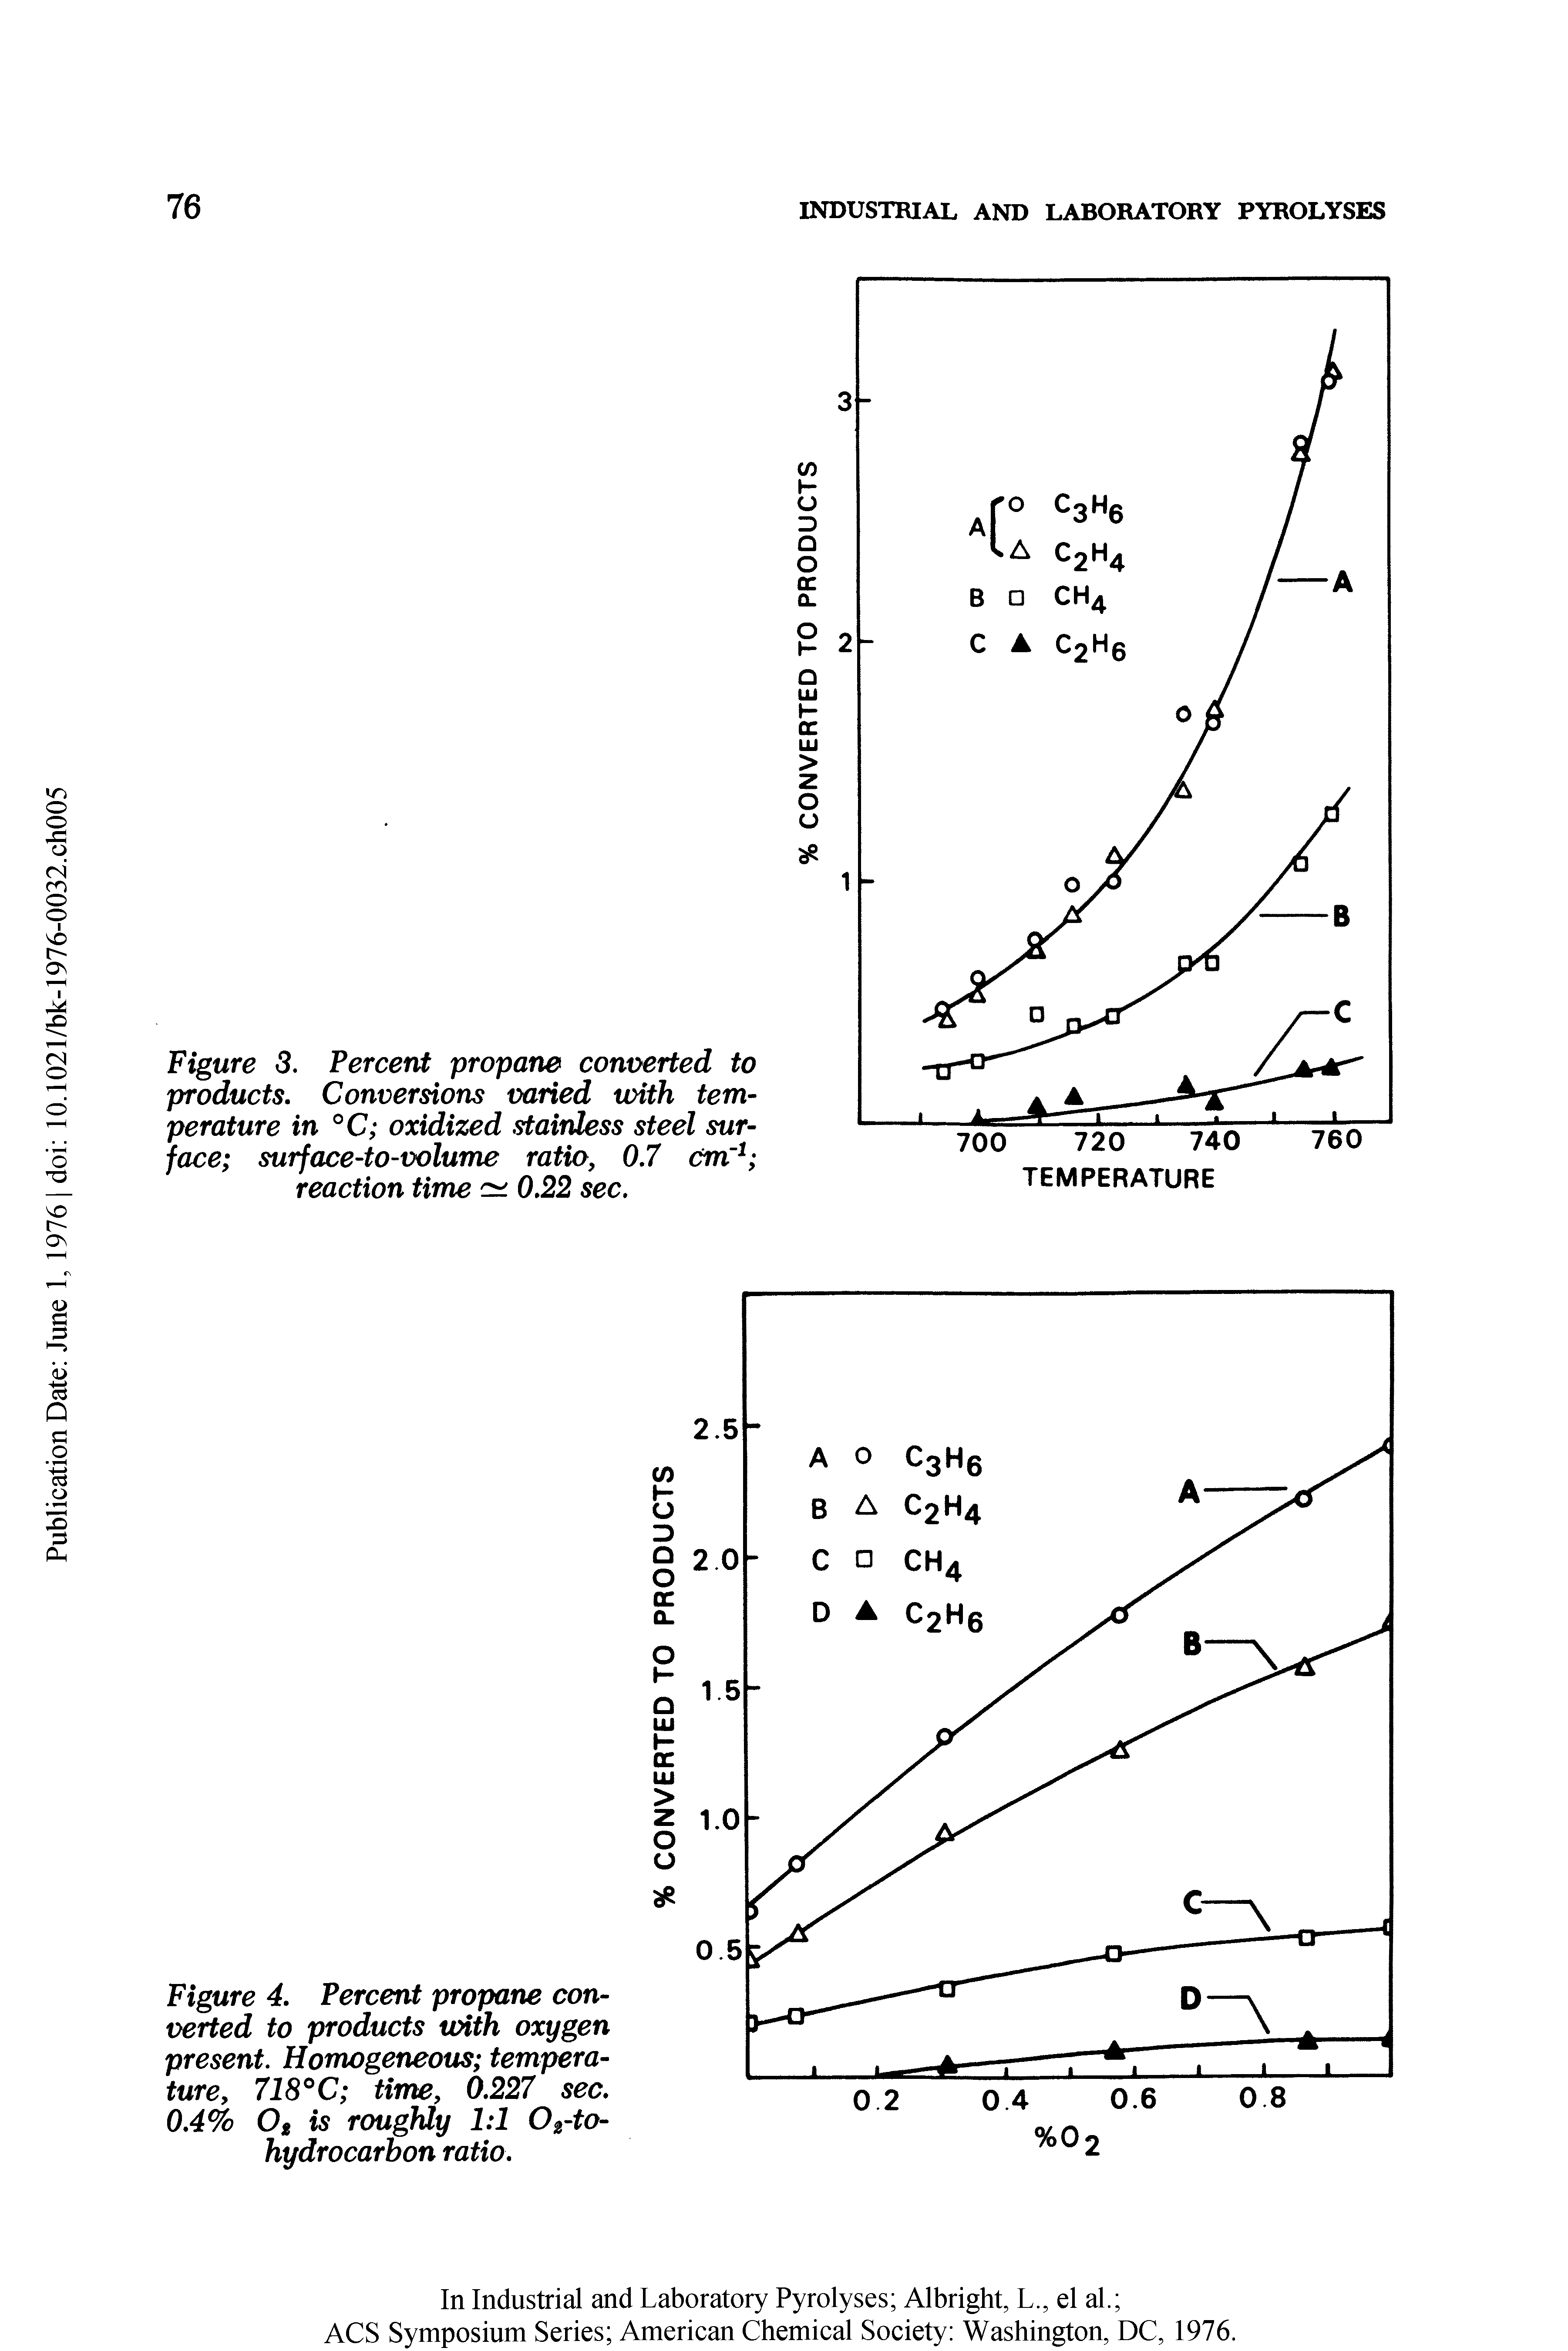 Figure 3. Percent propane converted to products. Conversions varied with temperature in °C oxidized stainless steel surface surface-to-volume ratio, 0.7 Cm reaction time 0.22 sec.